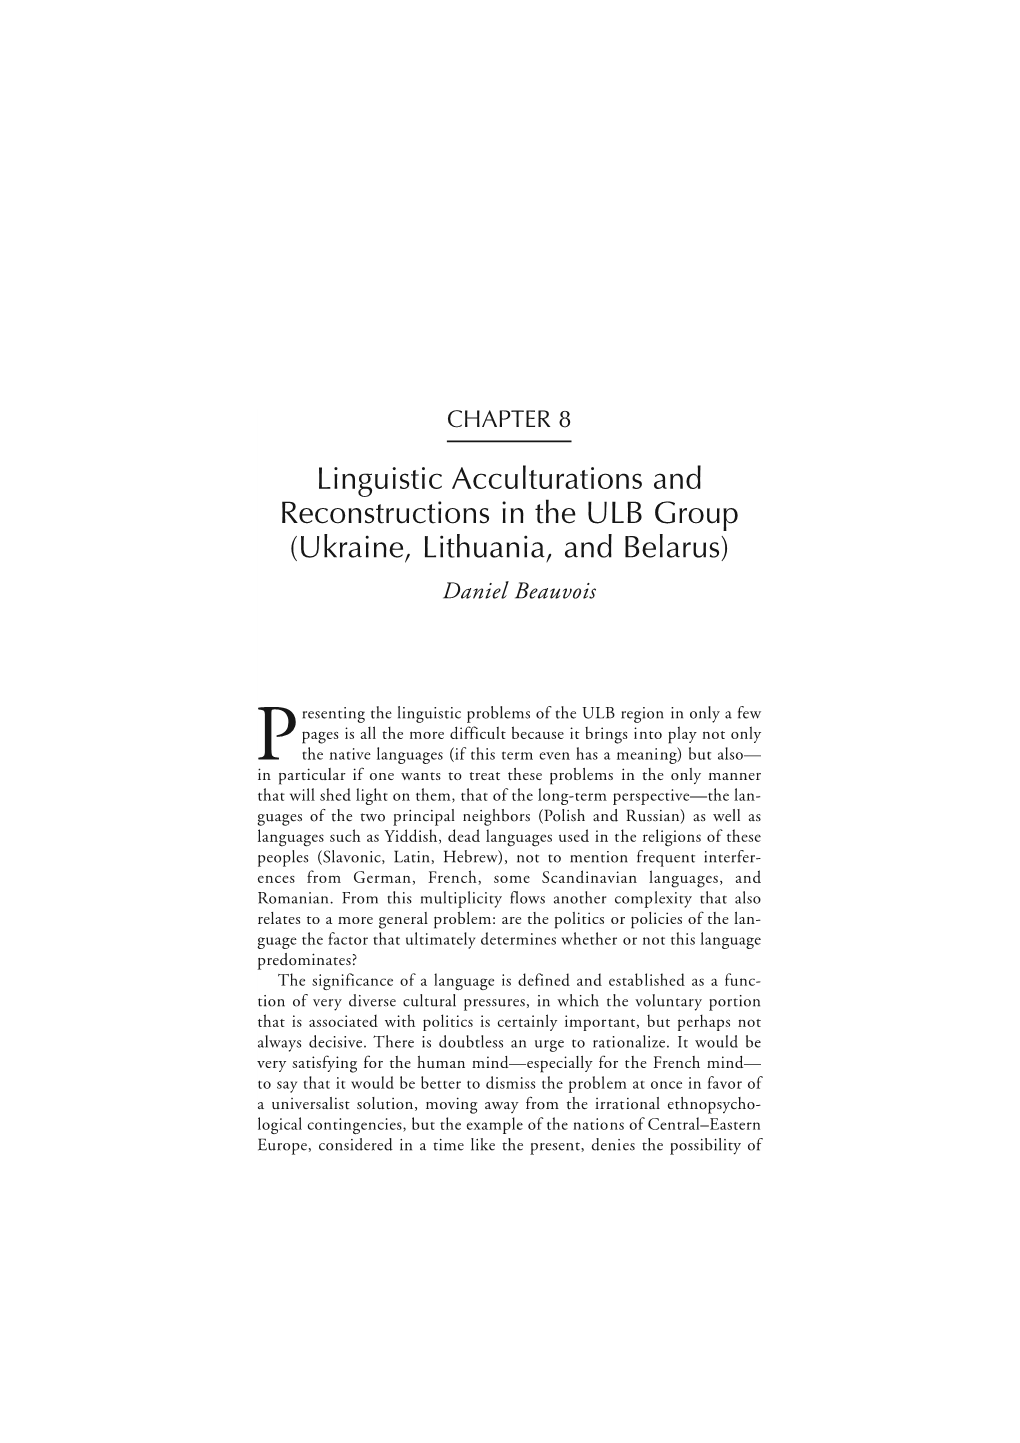 Linguistic Acculturations and Reconstructions in the ULB Group (Ukraine, Lithuania, and Belarus) Daniel Beauvois